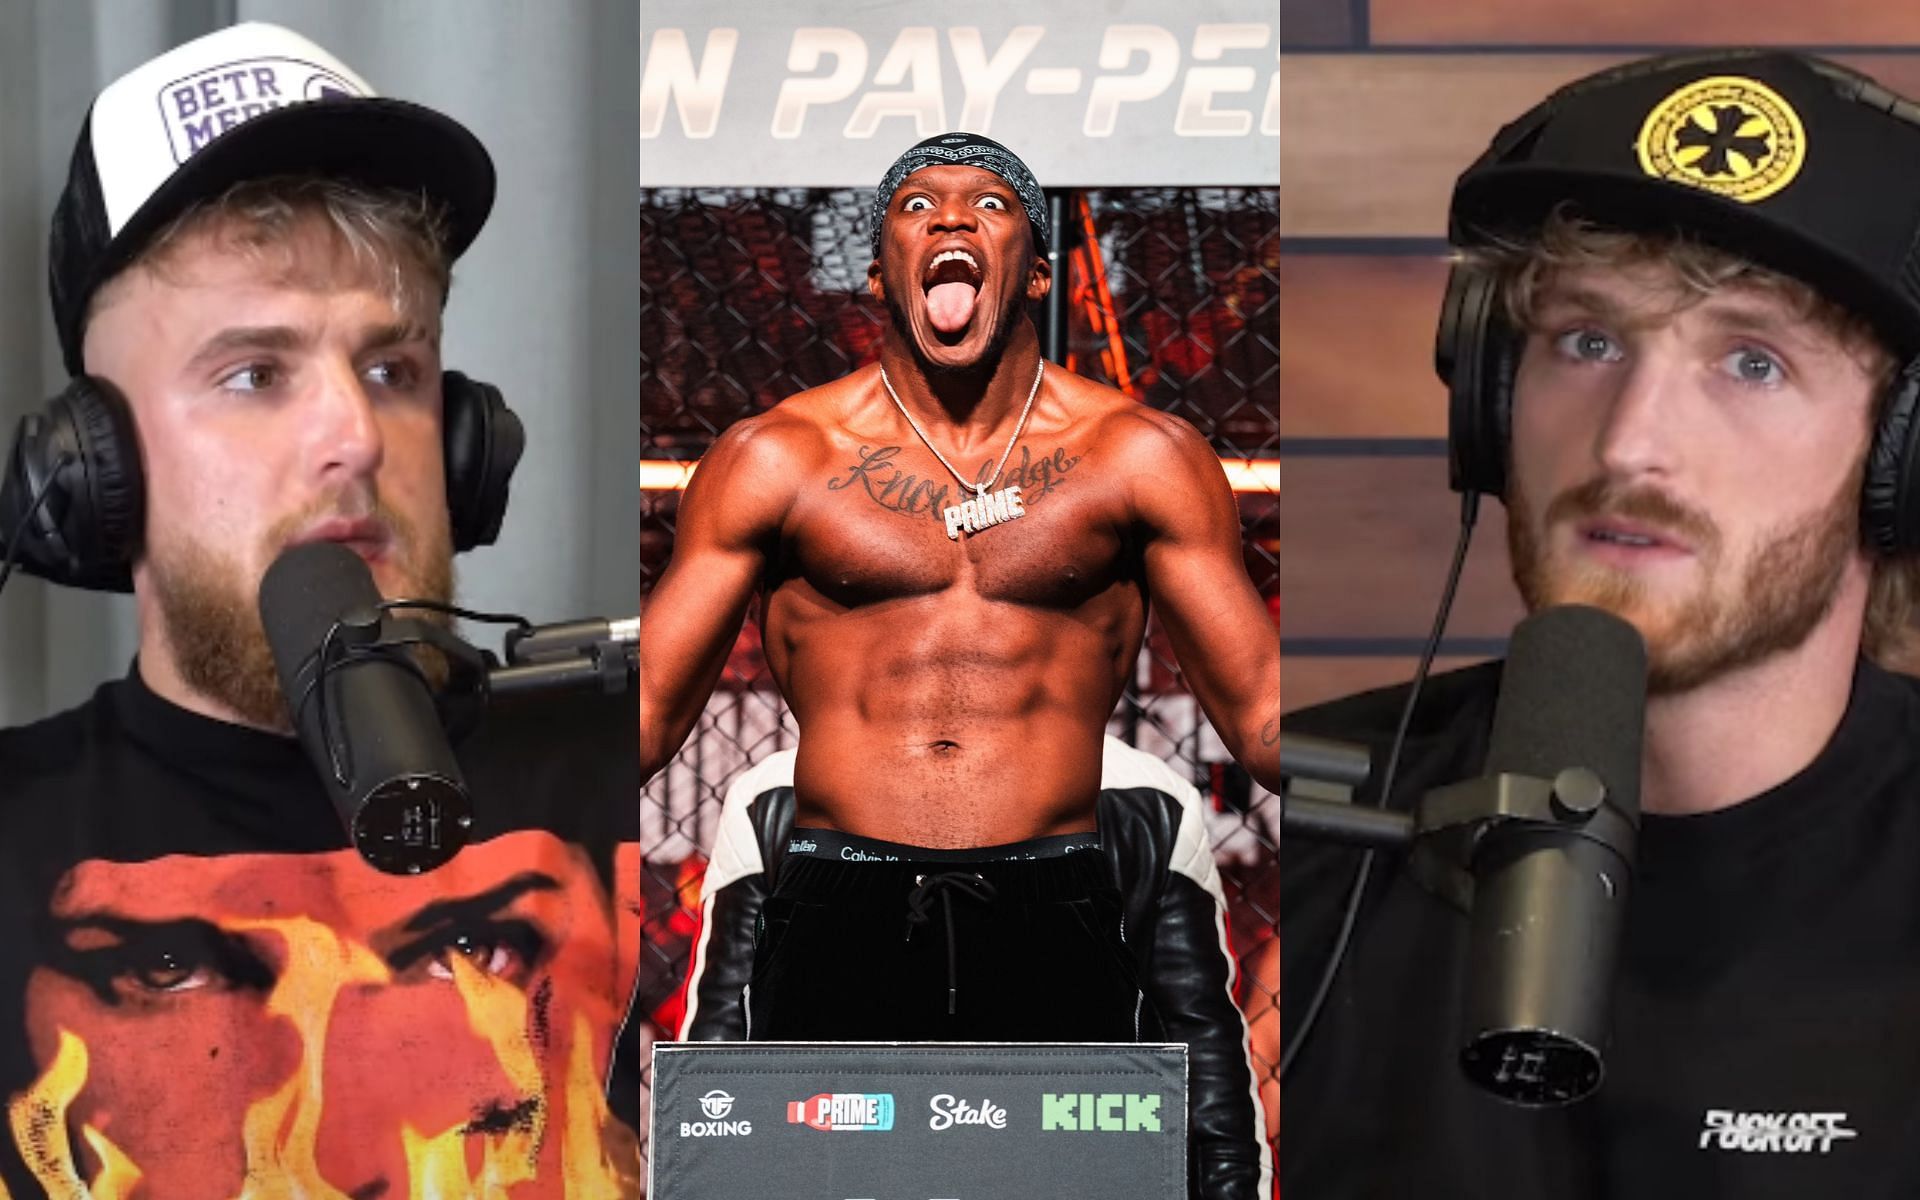 Logan Paul [Right] defended his business partner KSI [Middle] during an argument with his brother Jake Paul [Left] [Image courtesy: @KSI - X, and IMPAULSIVE - YouTube] 